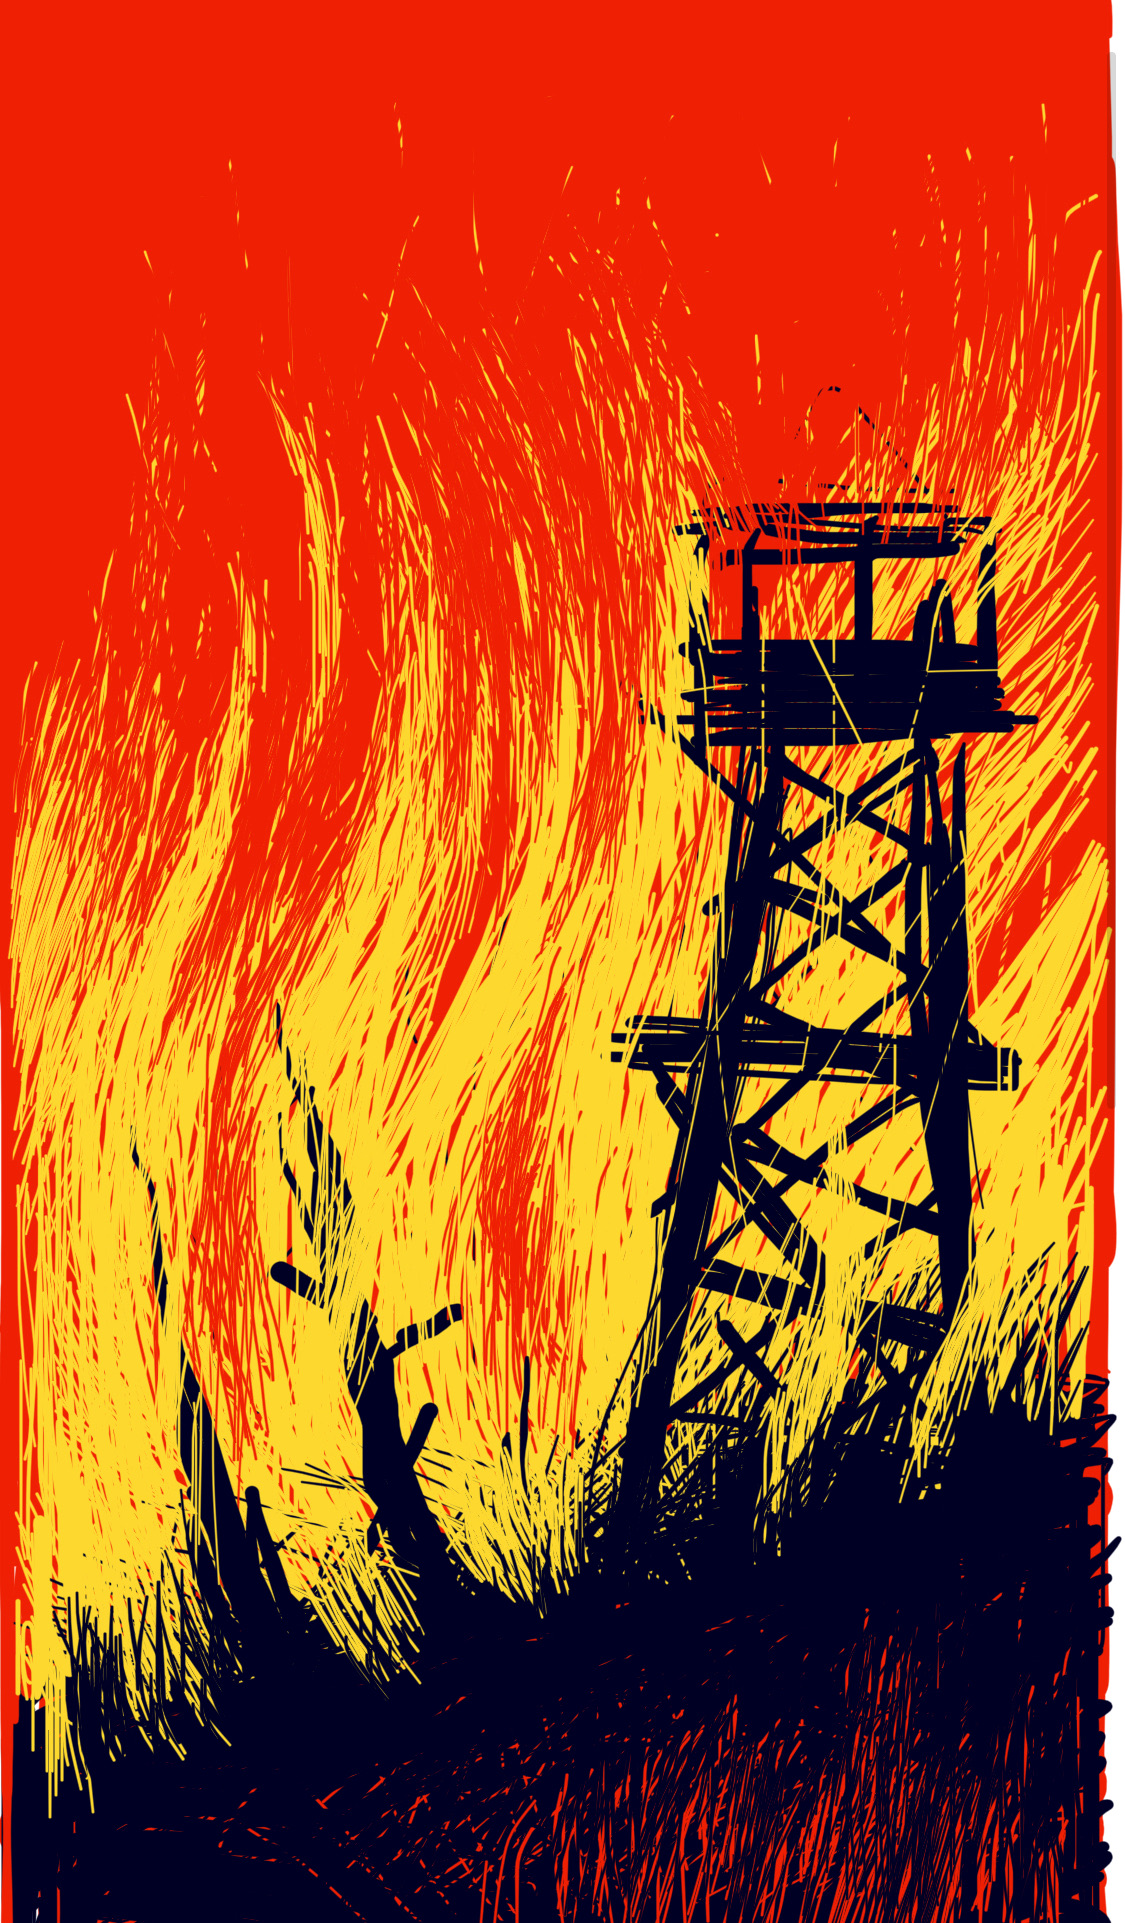 A burning firetower surrounded by an inferno